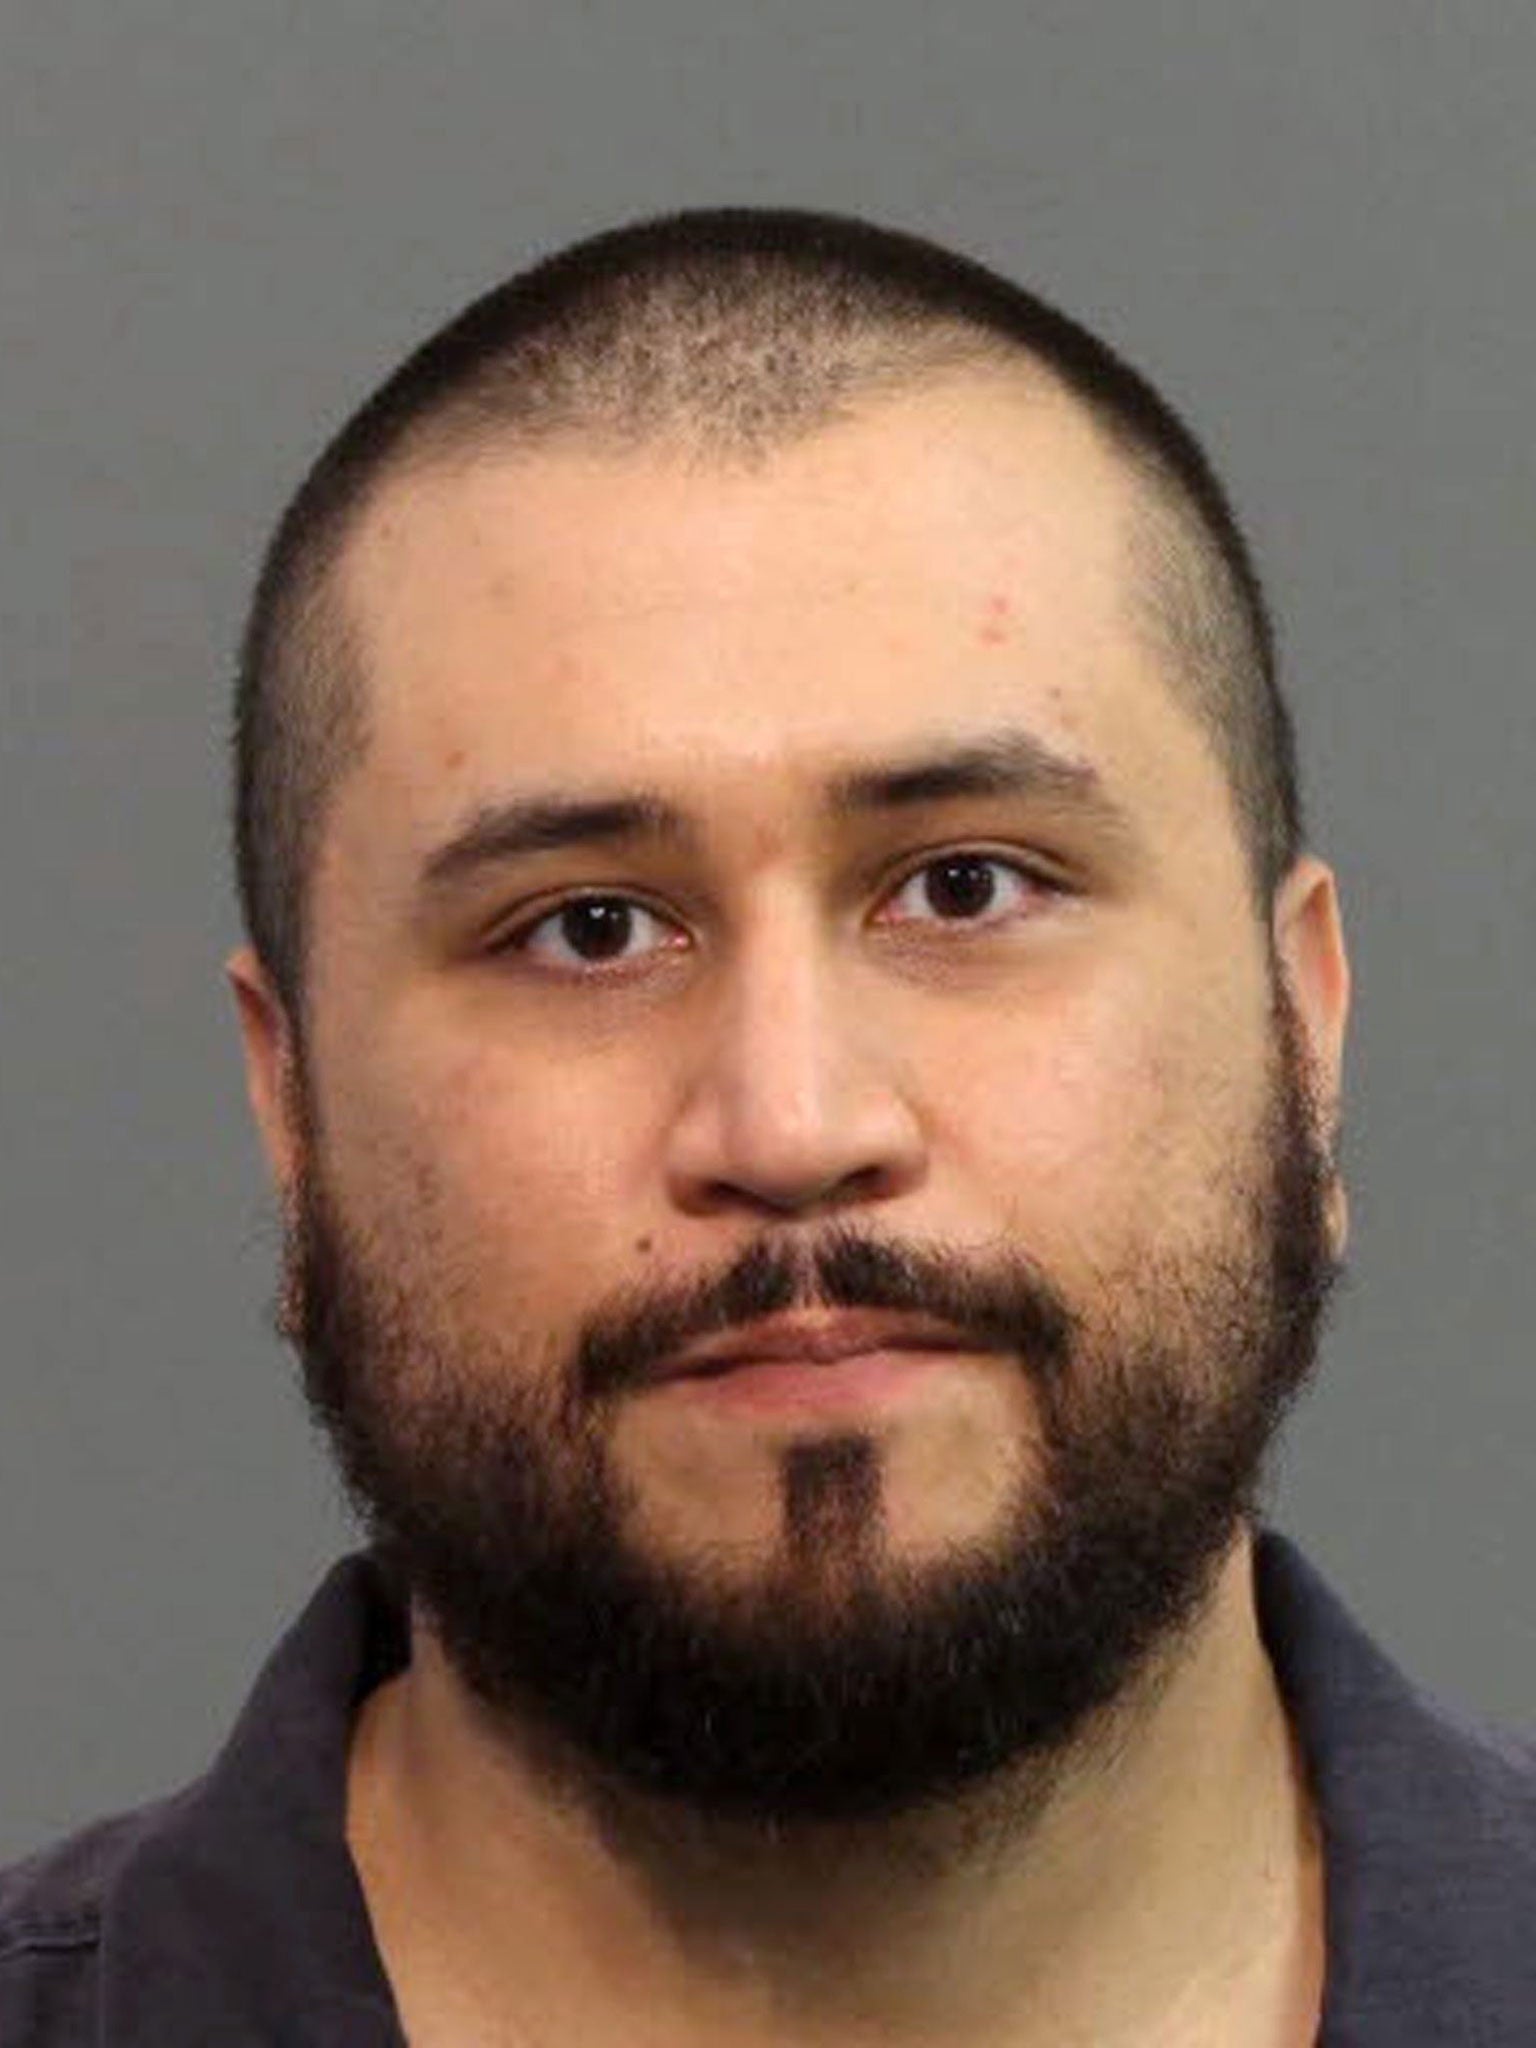 George Zimmerman was cleared of murder and manslaughter charges in 2013